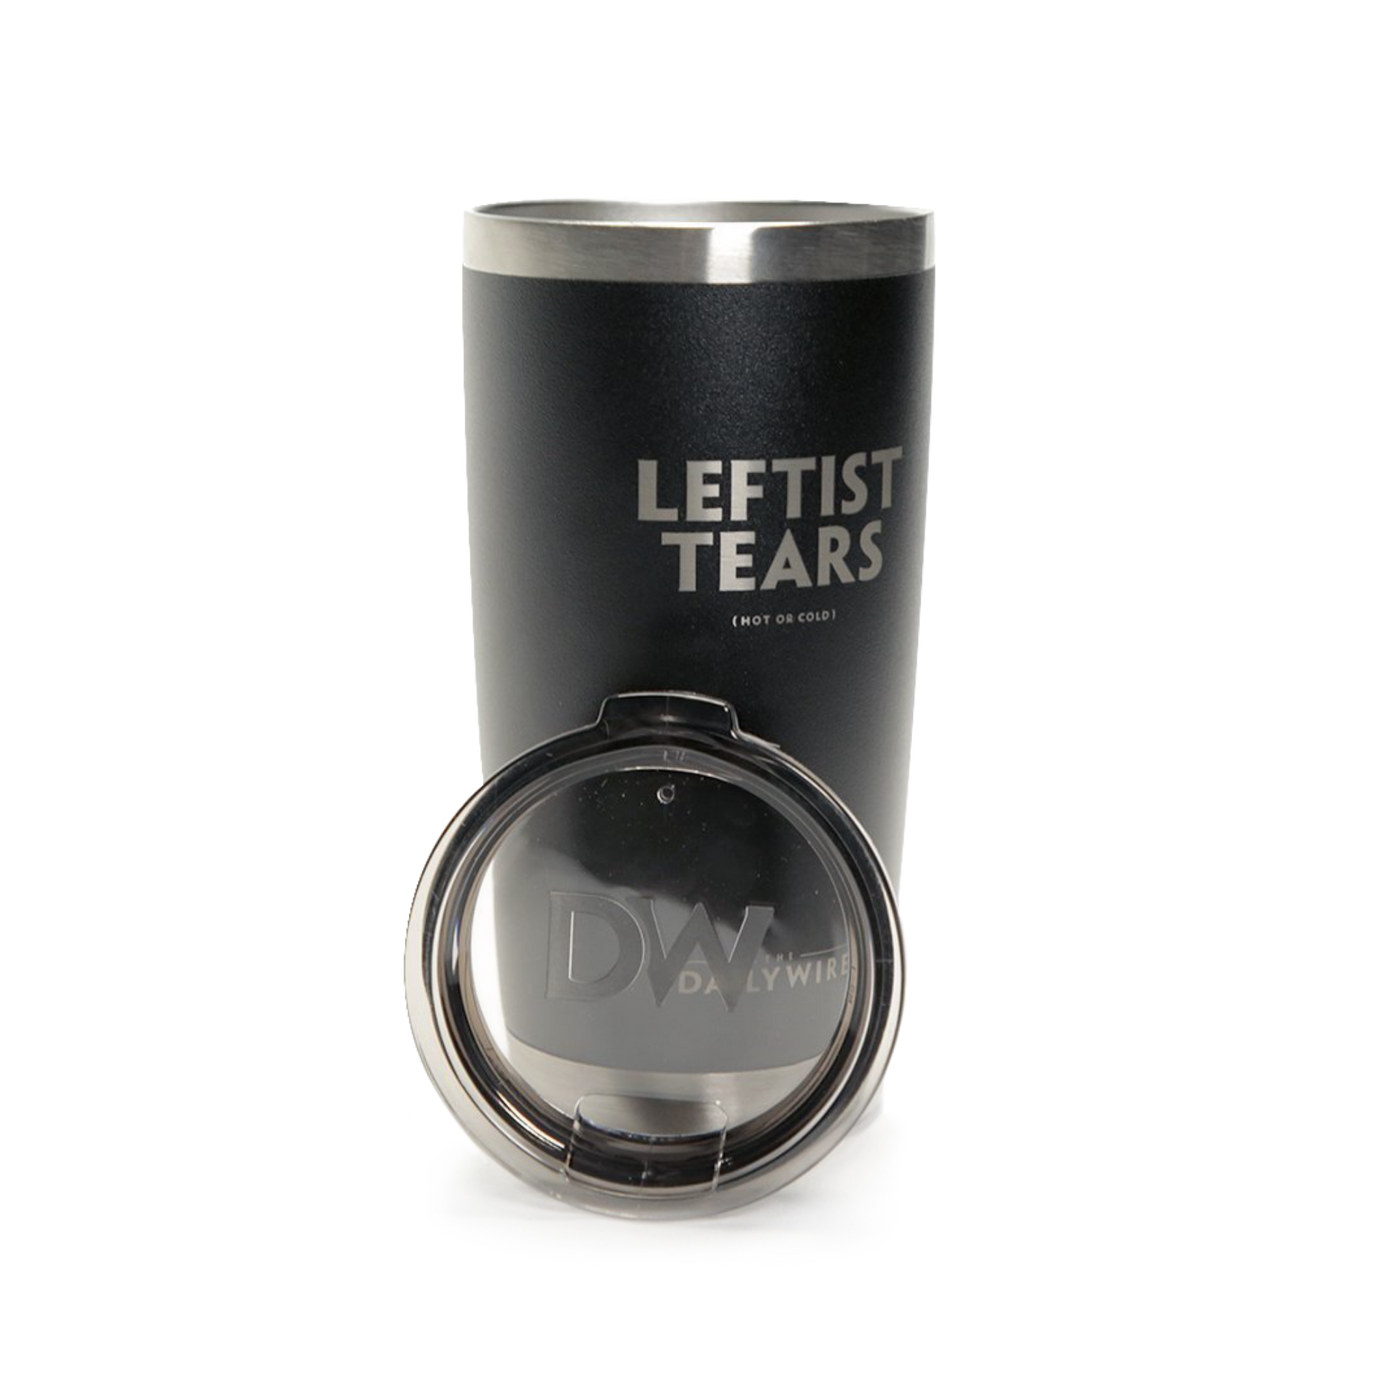 Leftist Tears Tumbler - FREE with Account Creation